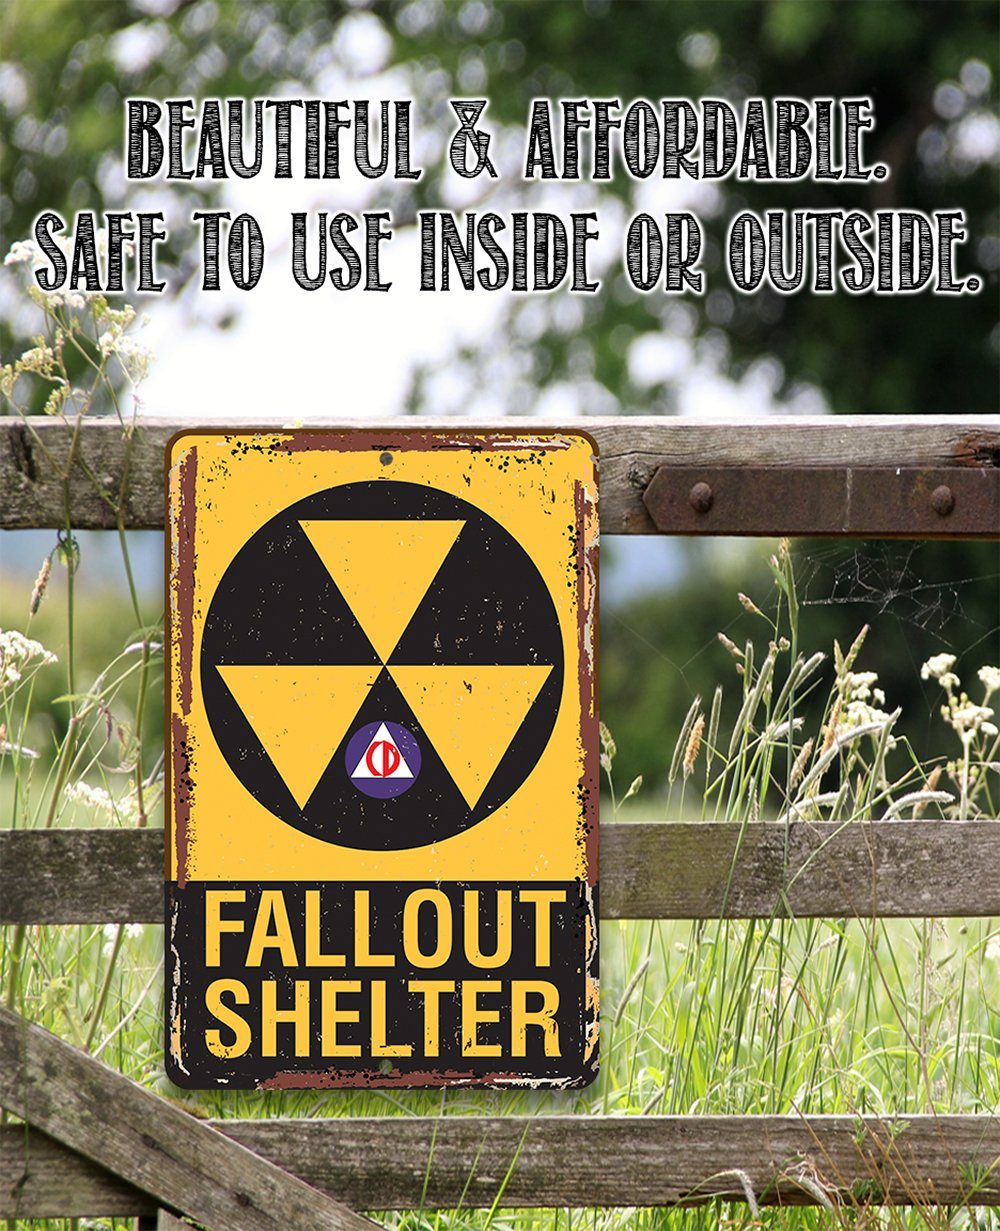 Fallout Shelter - Metal Sign | Lone Star Art.